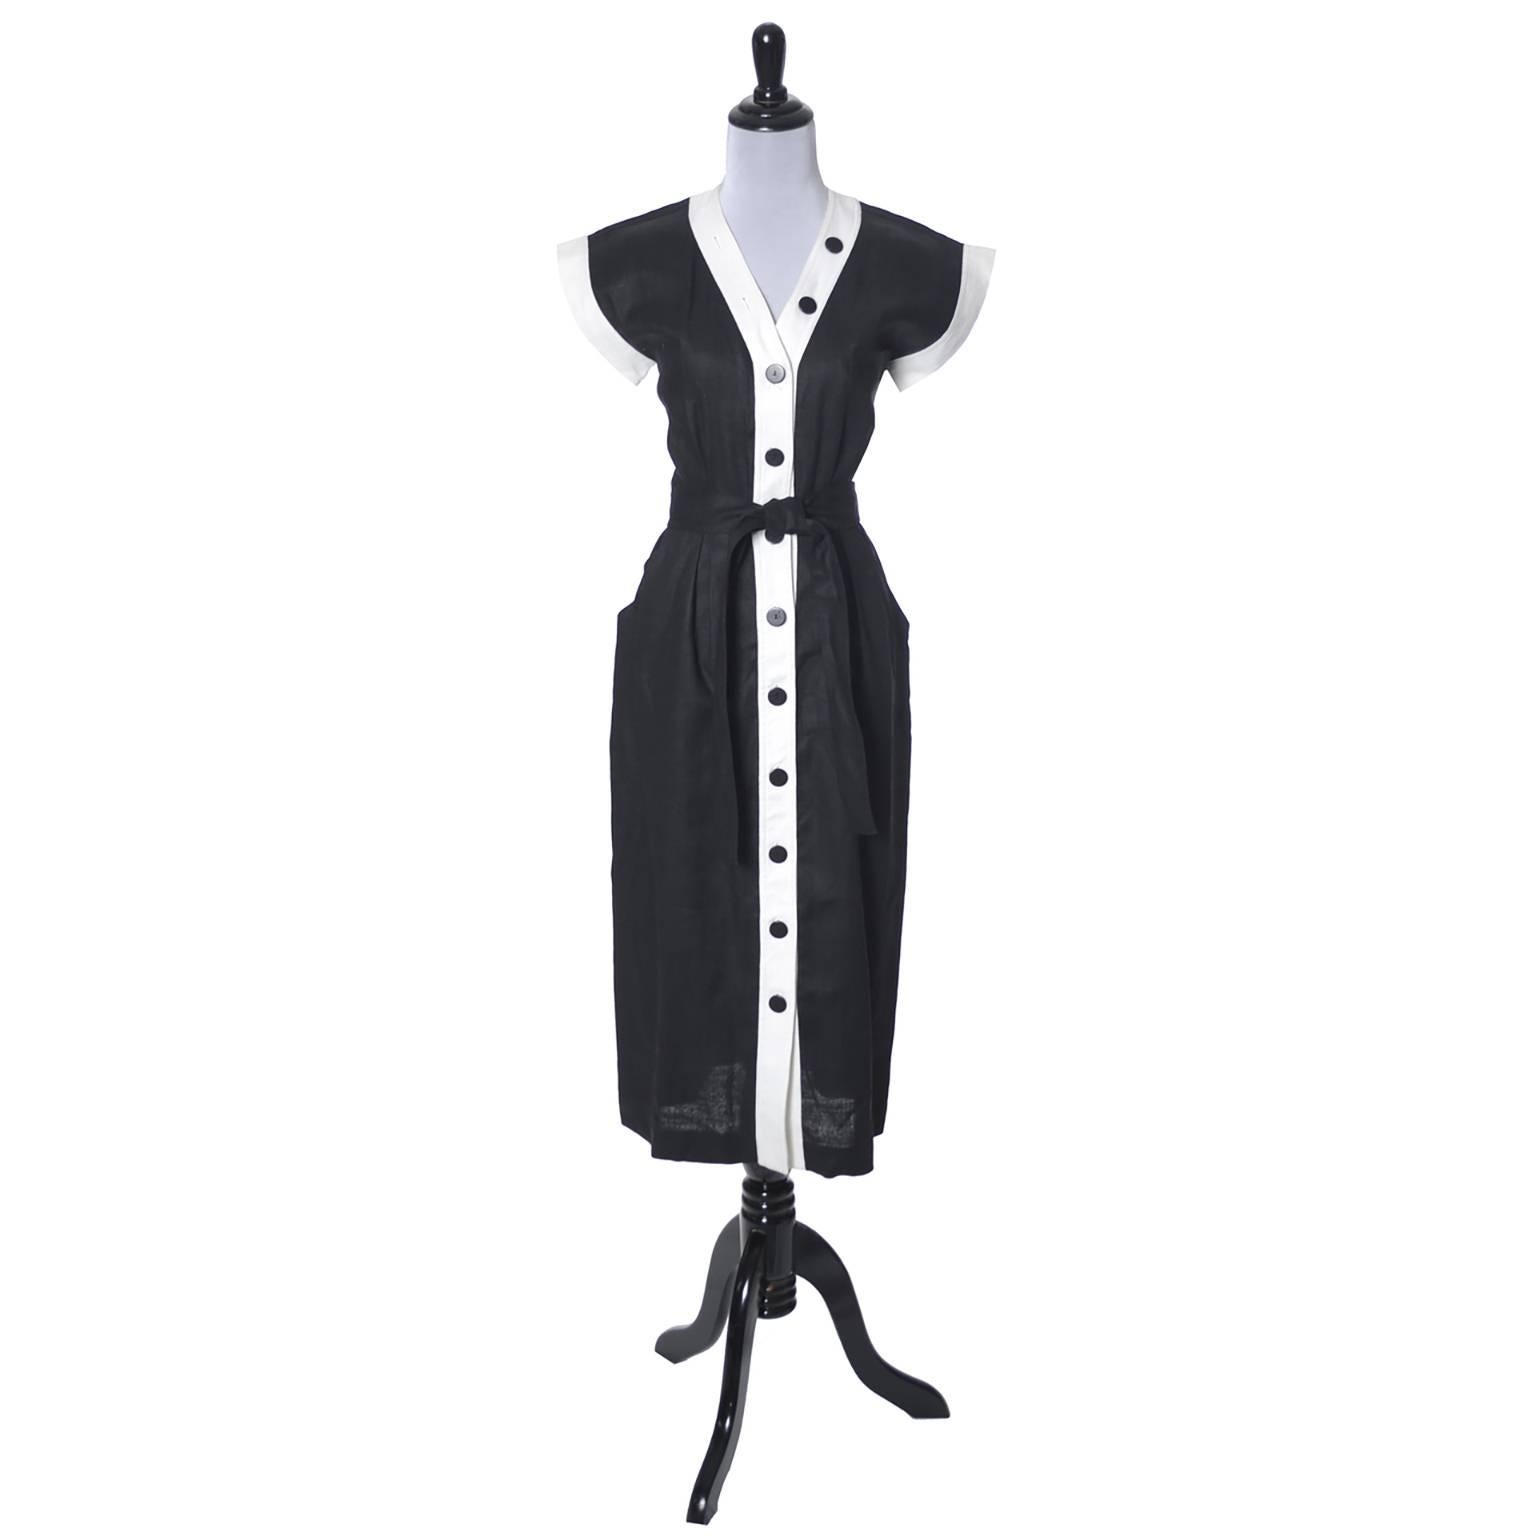 This is an impeccable black and white linen vintage dress from Yves Saint Laurent.  This YSL dress came from an estate that had some of the most amazing designer vintage clothing I have ever come across.  She had every major designer you could